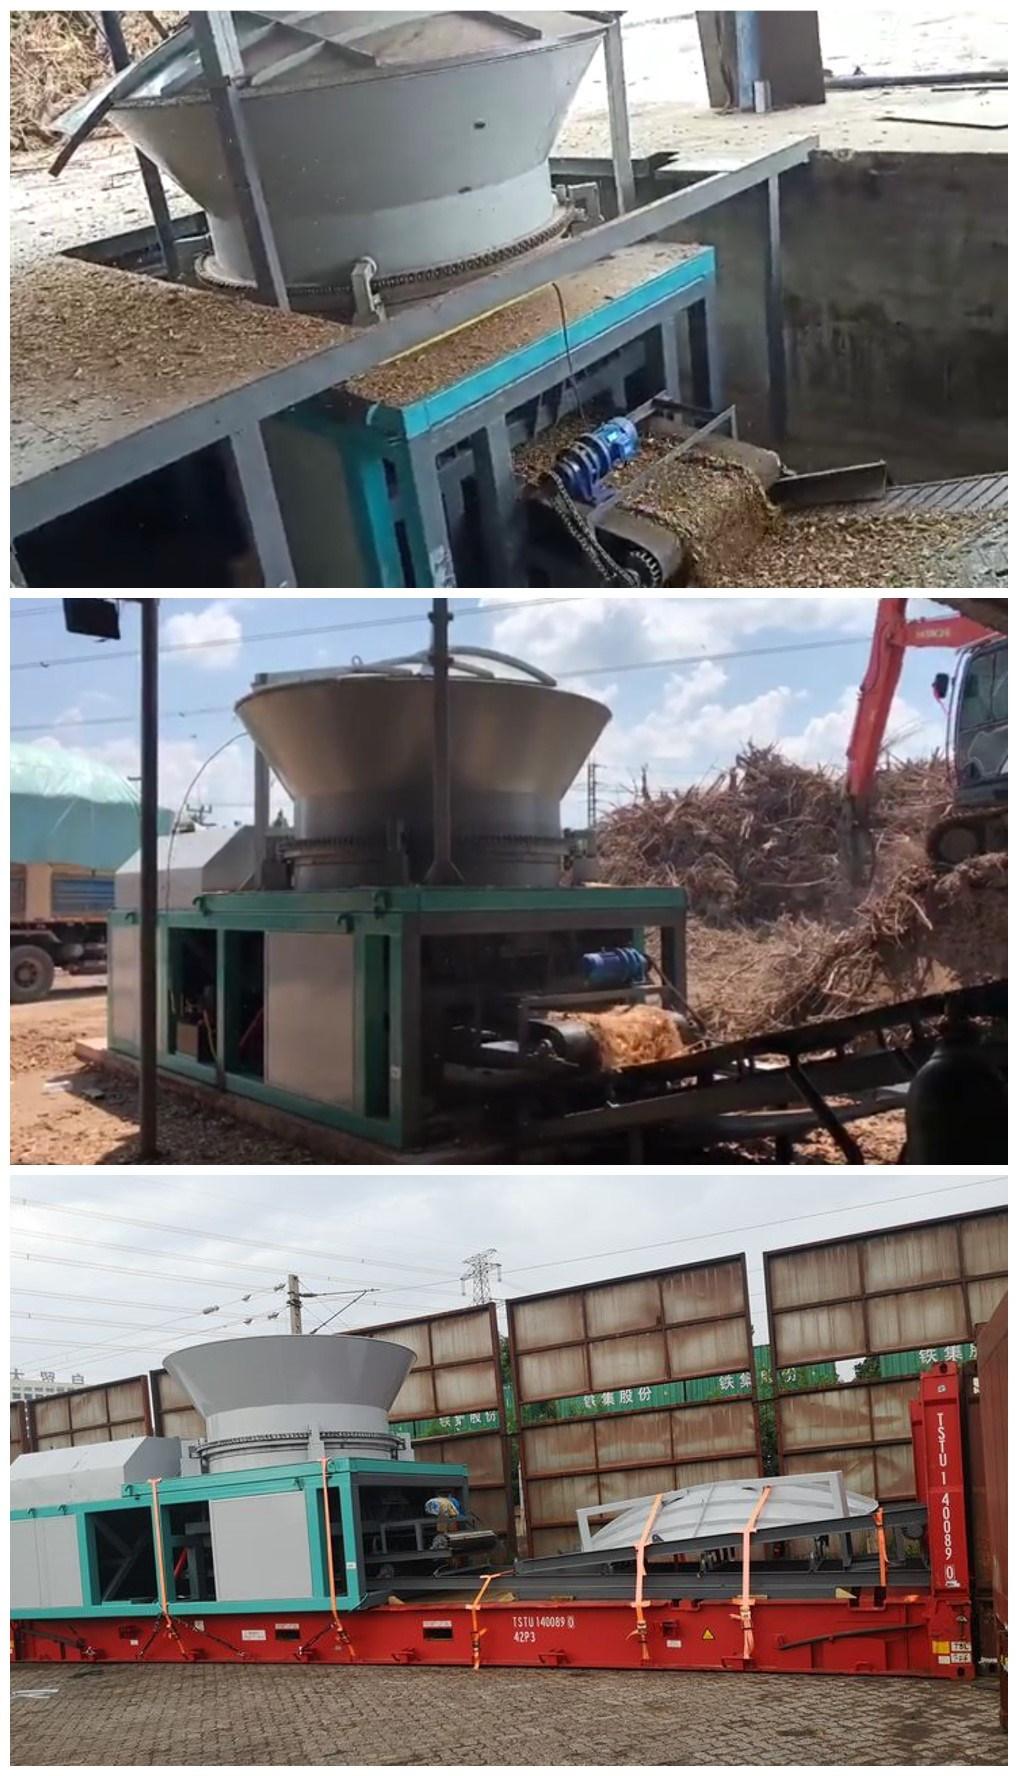 Factory Price Mobile Industrial Drum Wood Chipper Shredder Machine for Sale